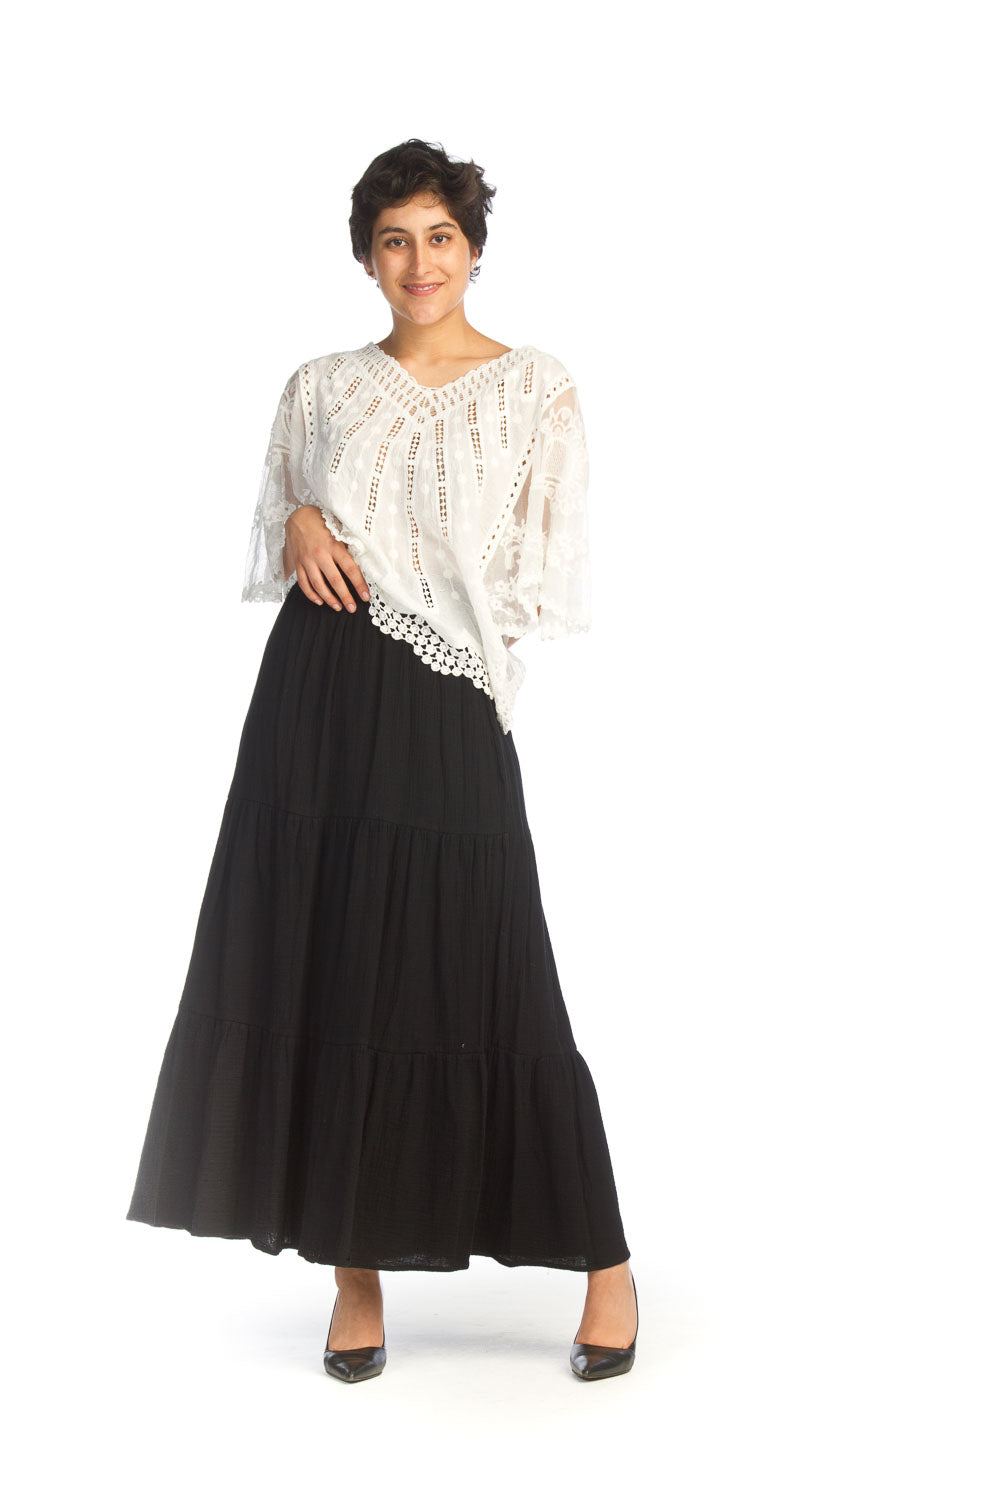 PS-14912 - COTTON GAUZE TIERED SKIRT WITH ELASTIC WAIST